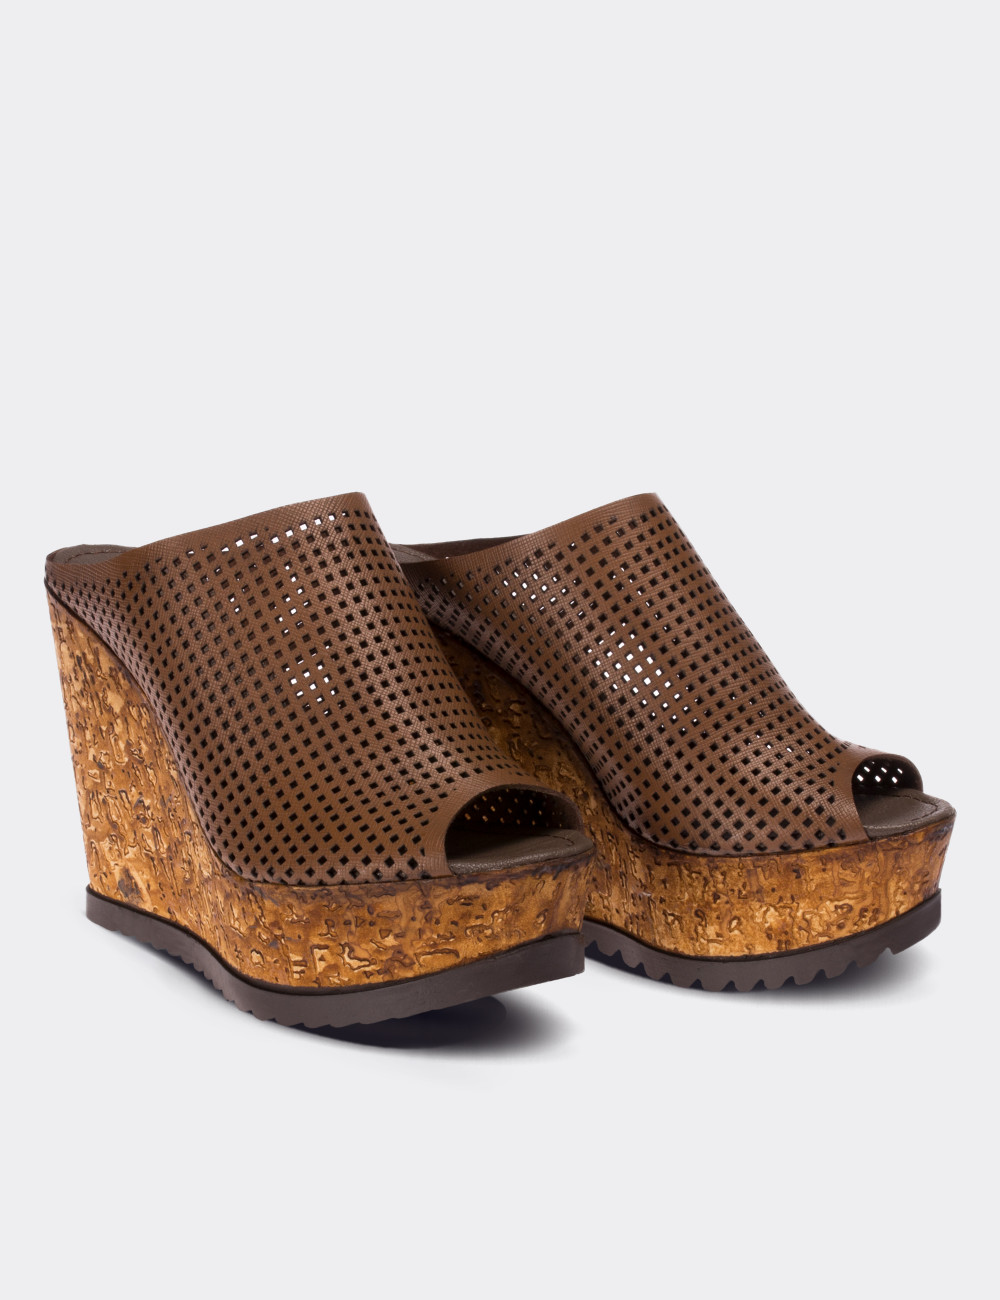 Tan  Leather Wedge Sandals - 02012ZTBAP03